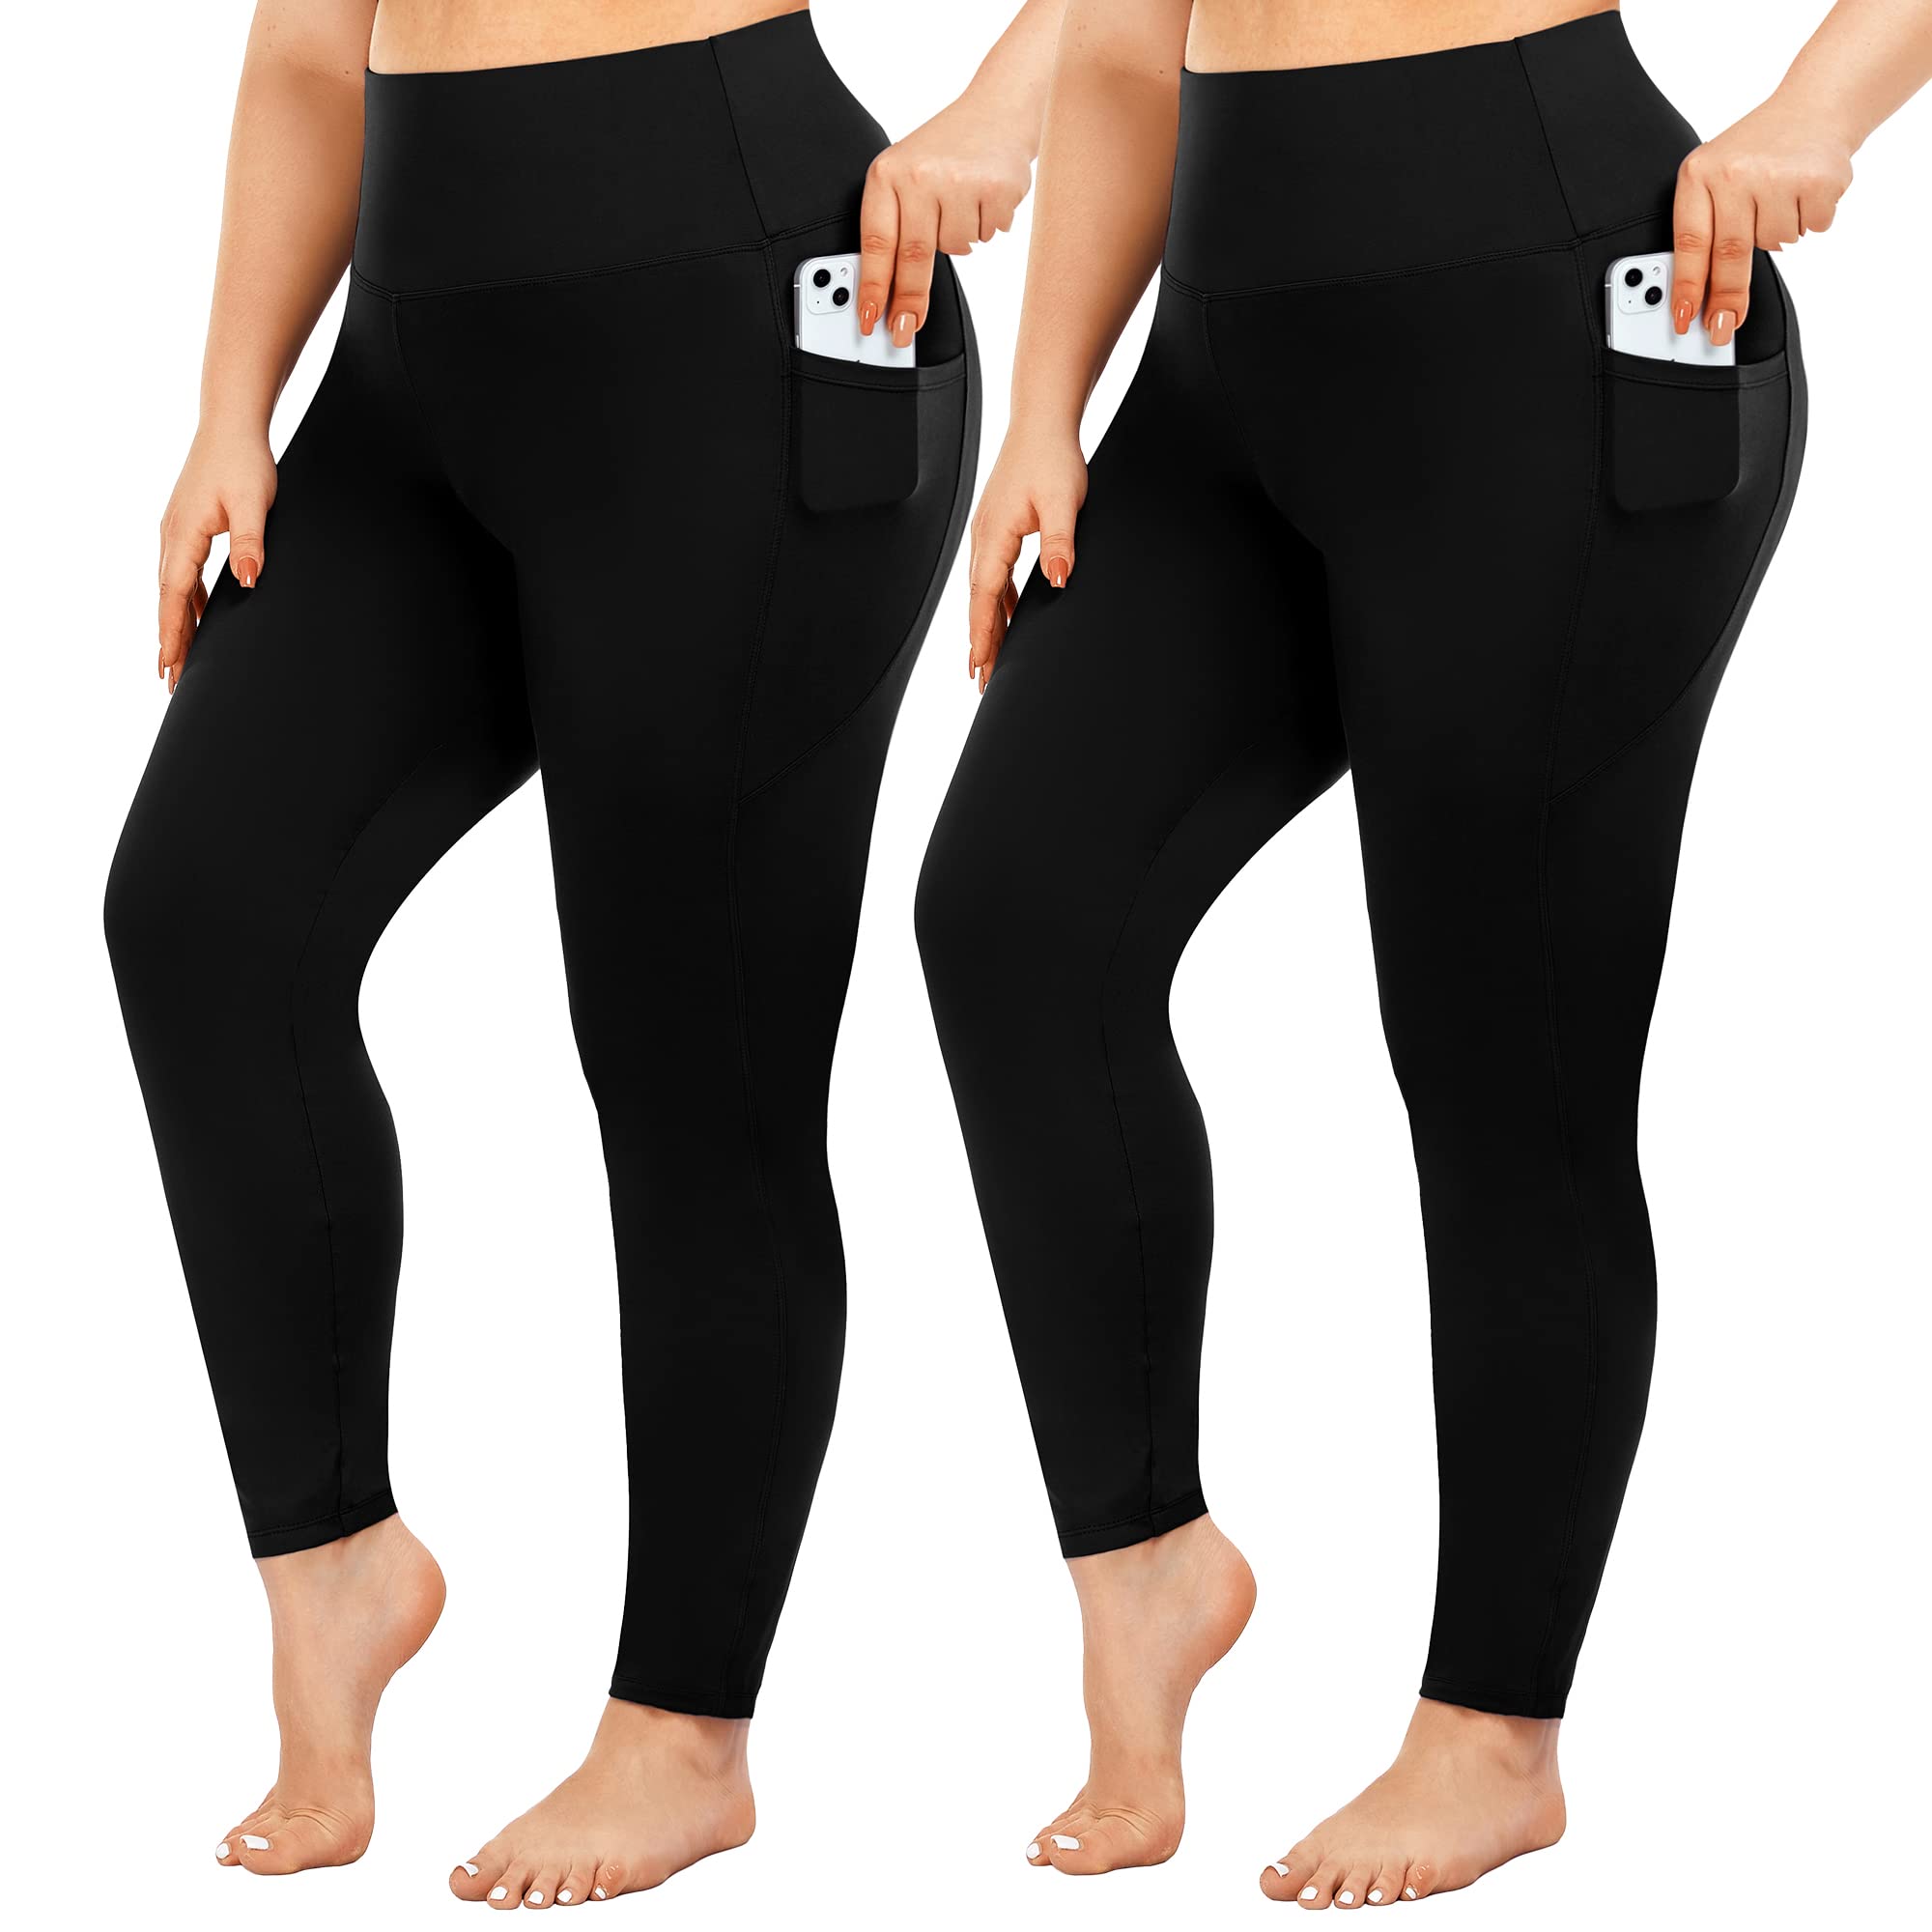 High Waisted Tummy Control Leggings with Pockets - 4 France